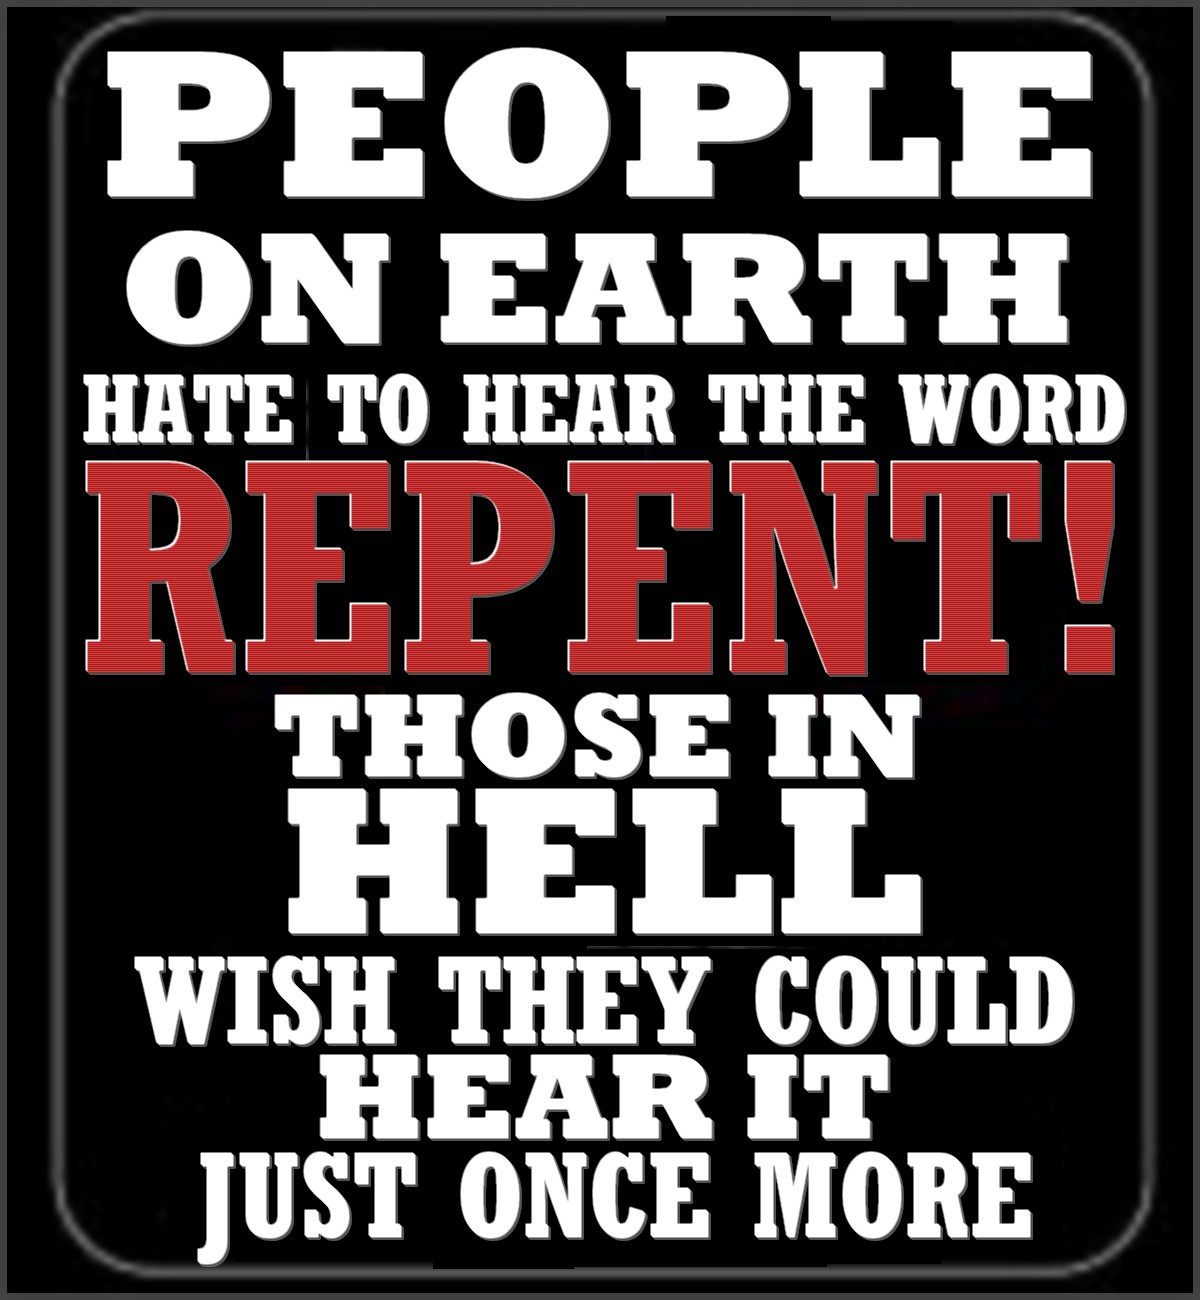 Repent!